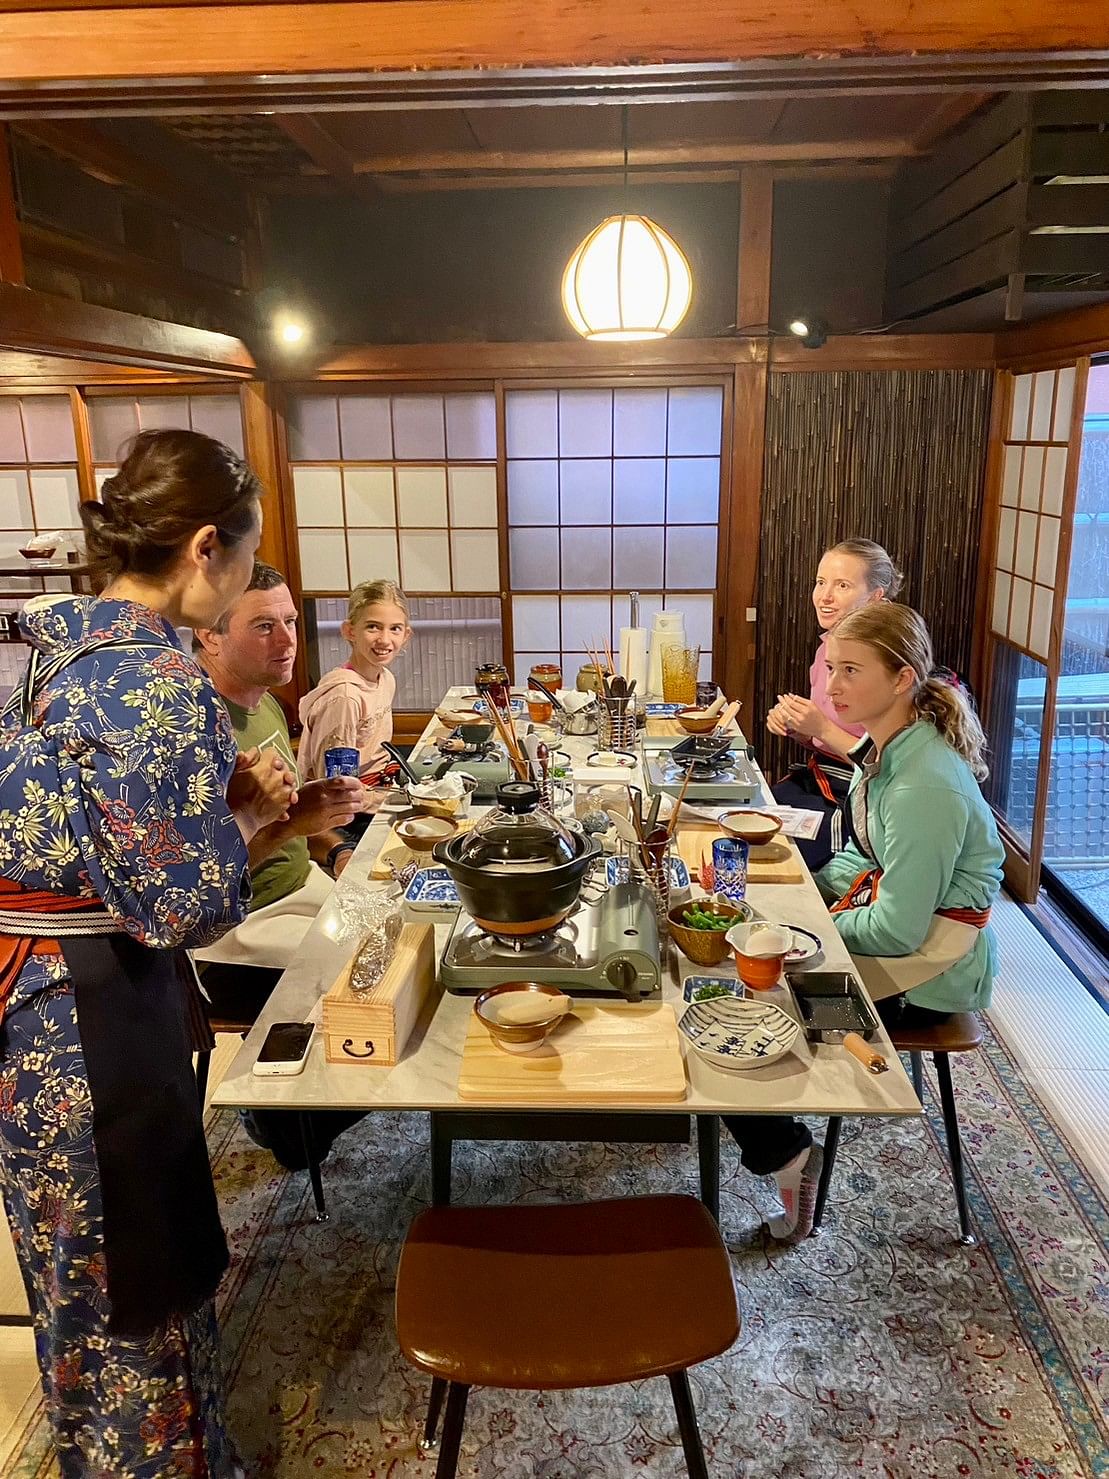 A luxurious private experience in Asakusa! Let's enjoy Japanese cuisine and tea ceremony!